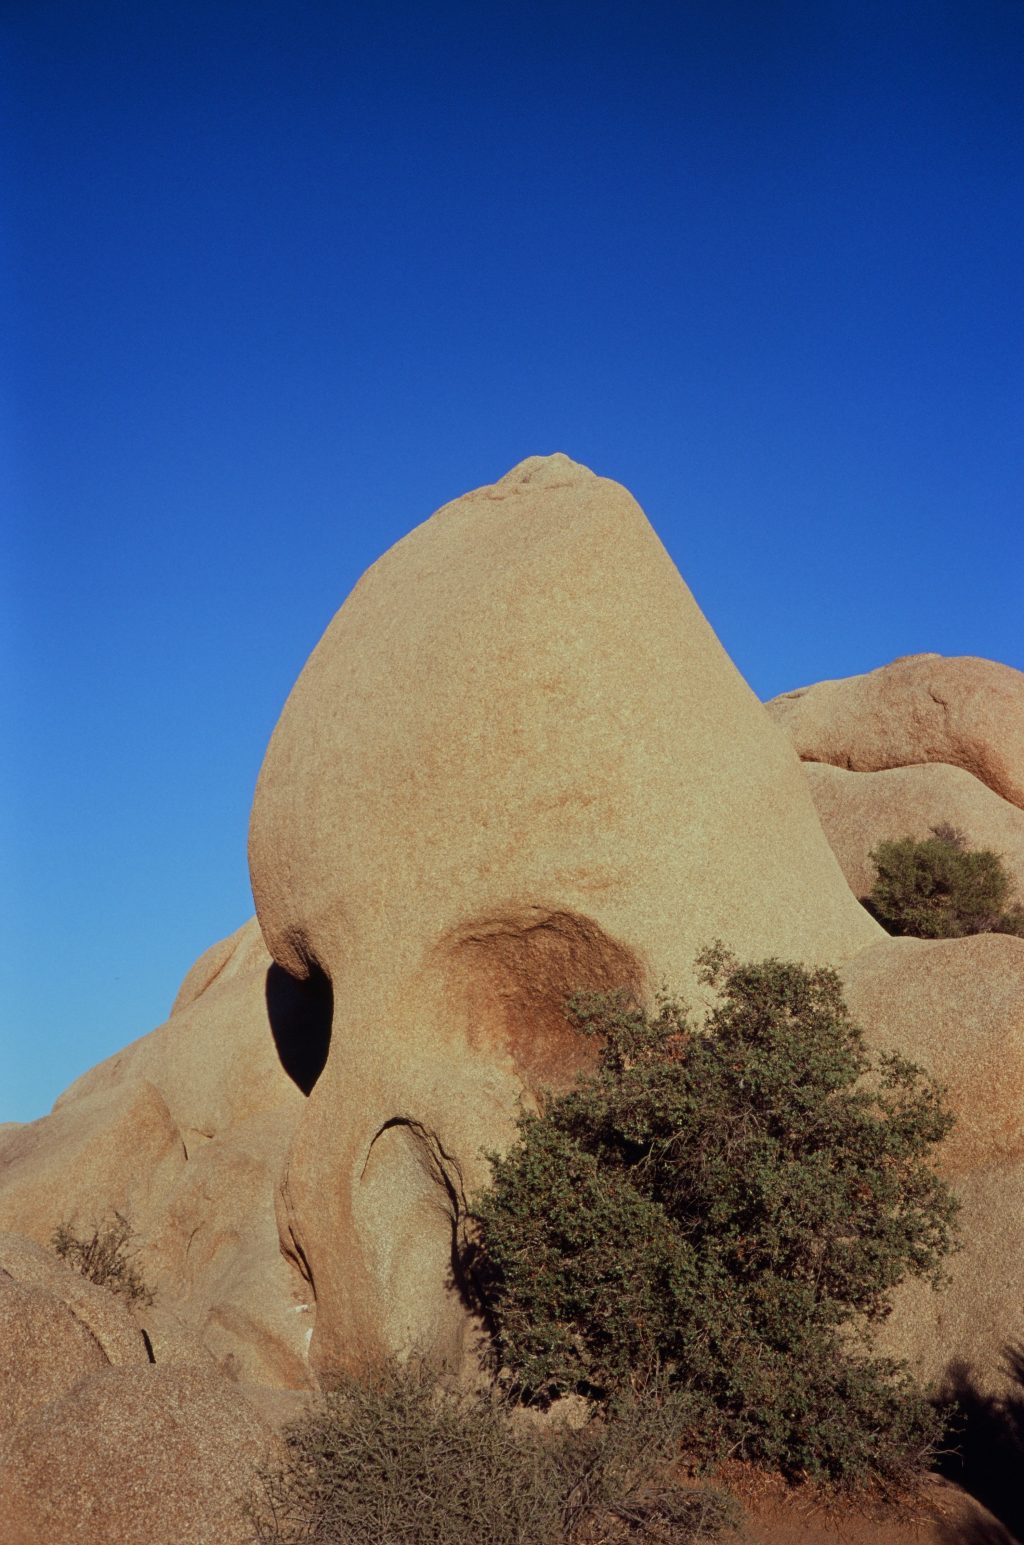 Fuji Velvia 100 Leica CL, paired with a 40mm Summicron Skull Rock - Joshua Tree National Park